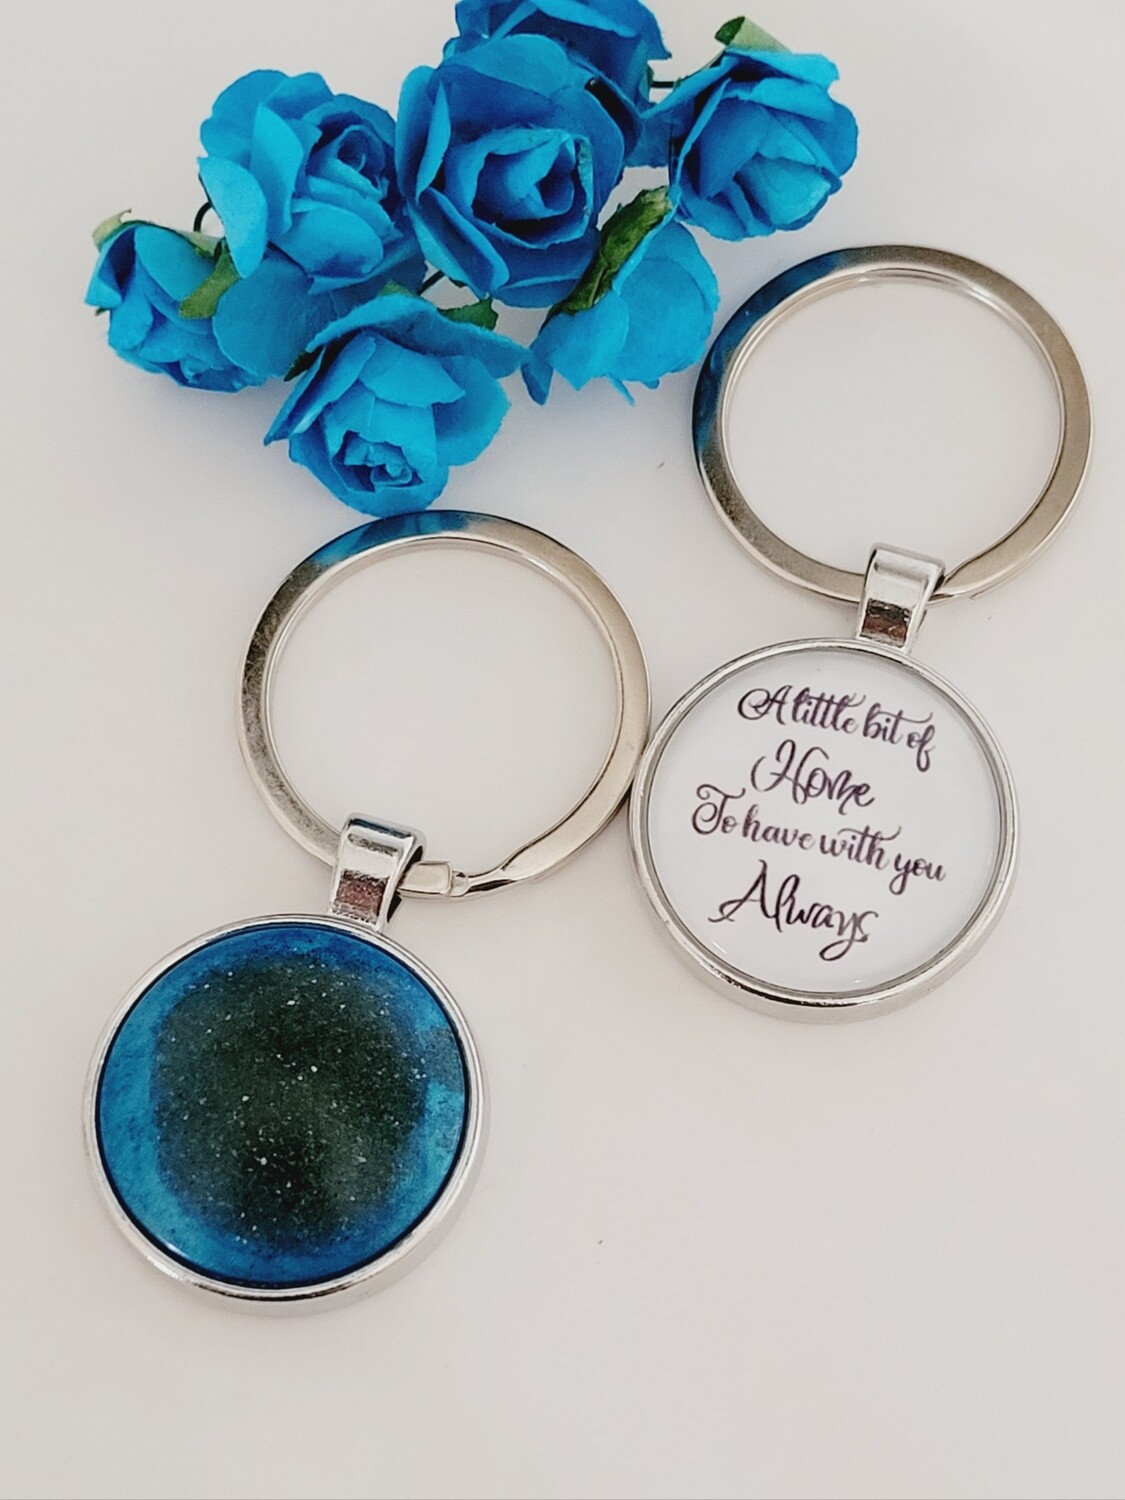 "Forever" -   " A little bit of Home" Infused Key Ring